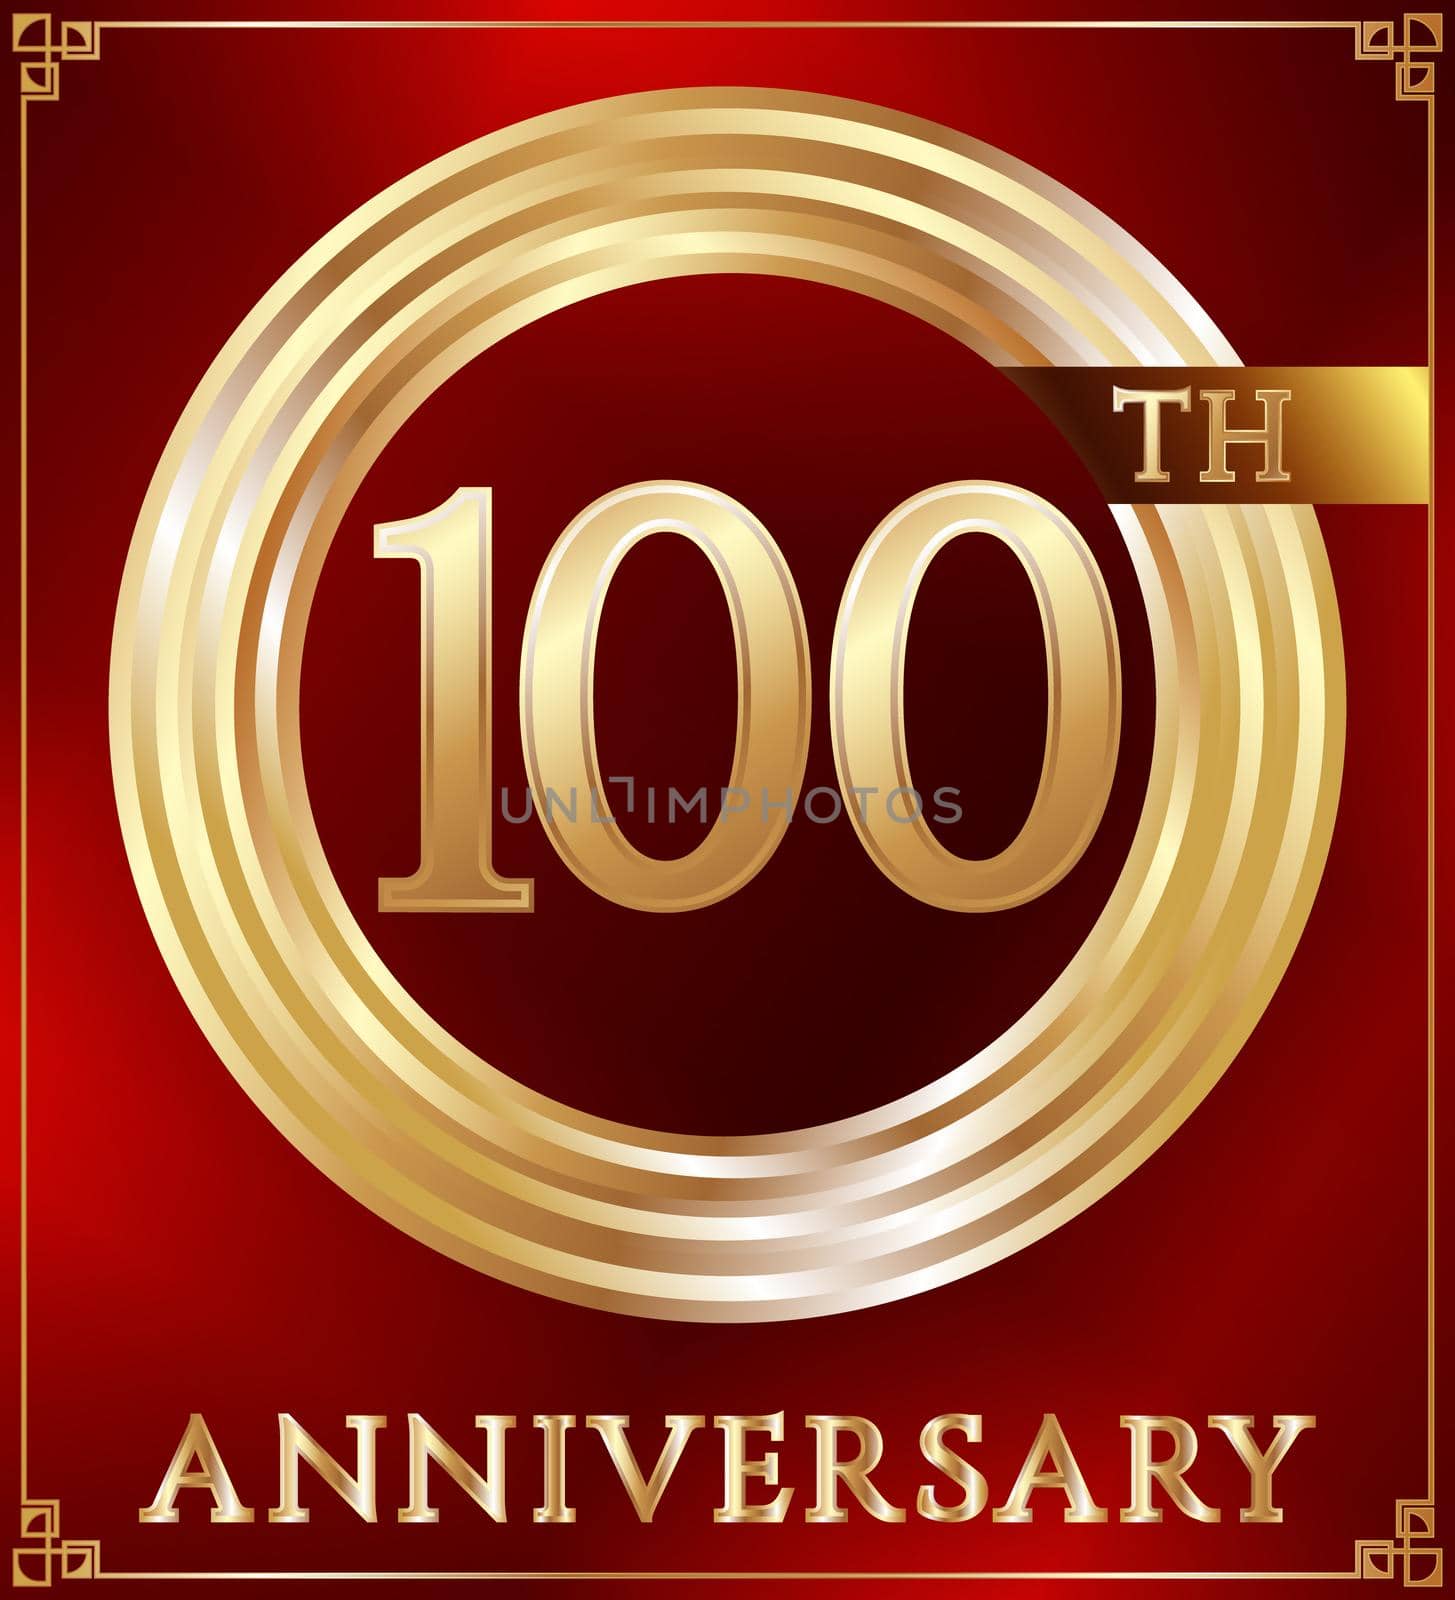 Anniversary gold ring logo number 100. Anniversary card. Red background. Vector illustration.